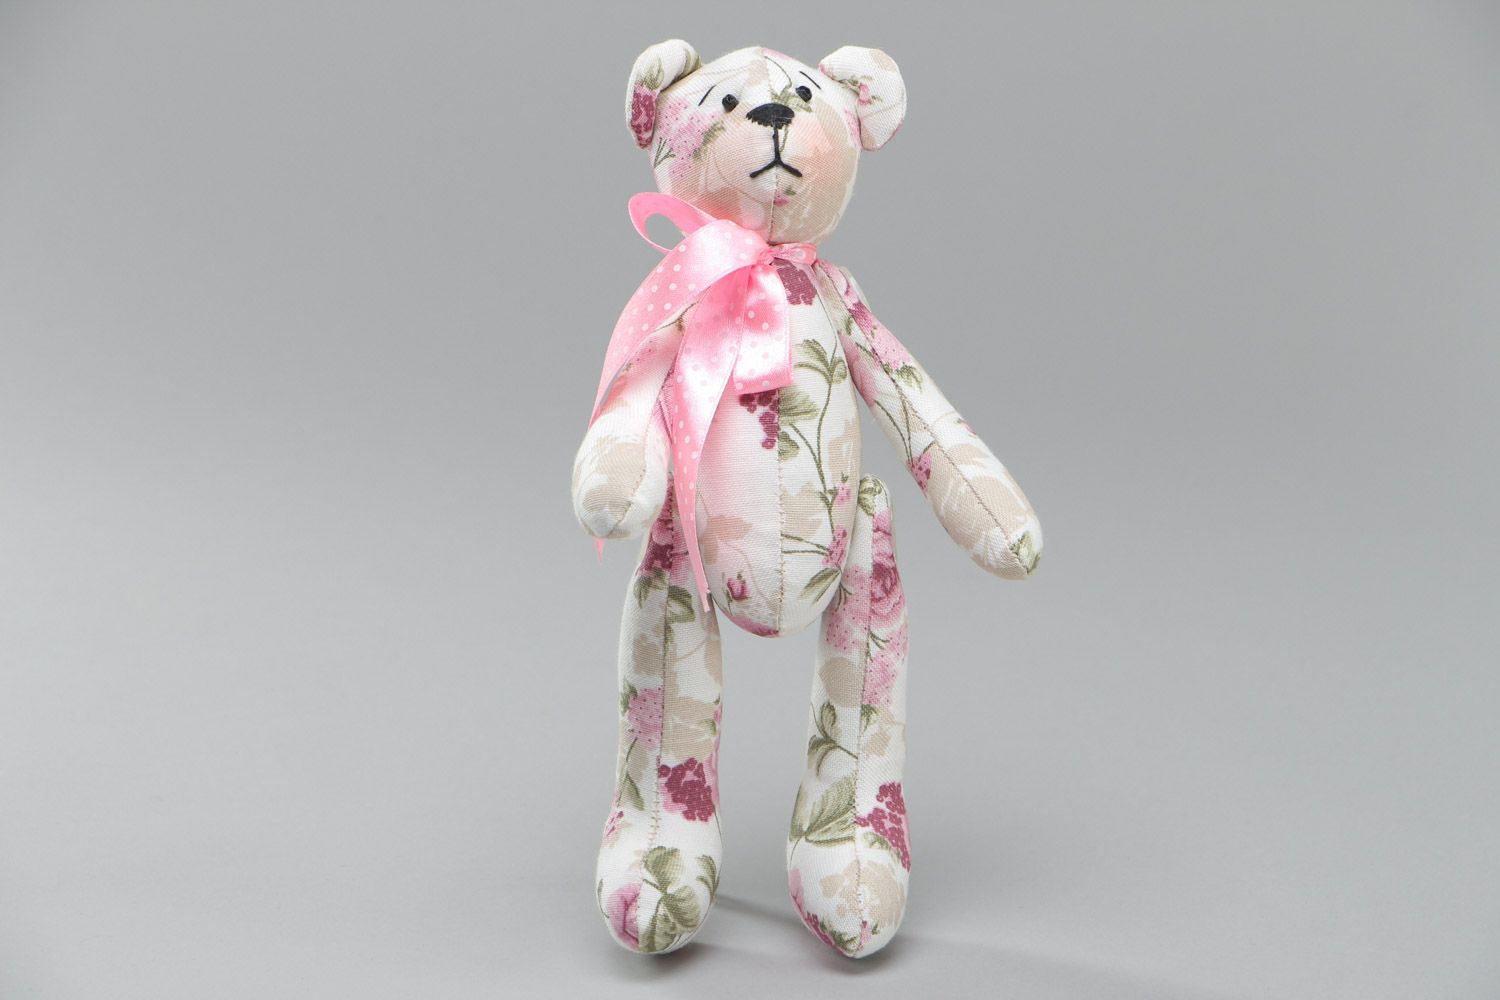 Handmade soft toy bear sewn of cotton fabric with light floral print photo 2